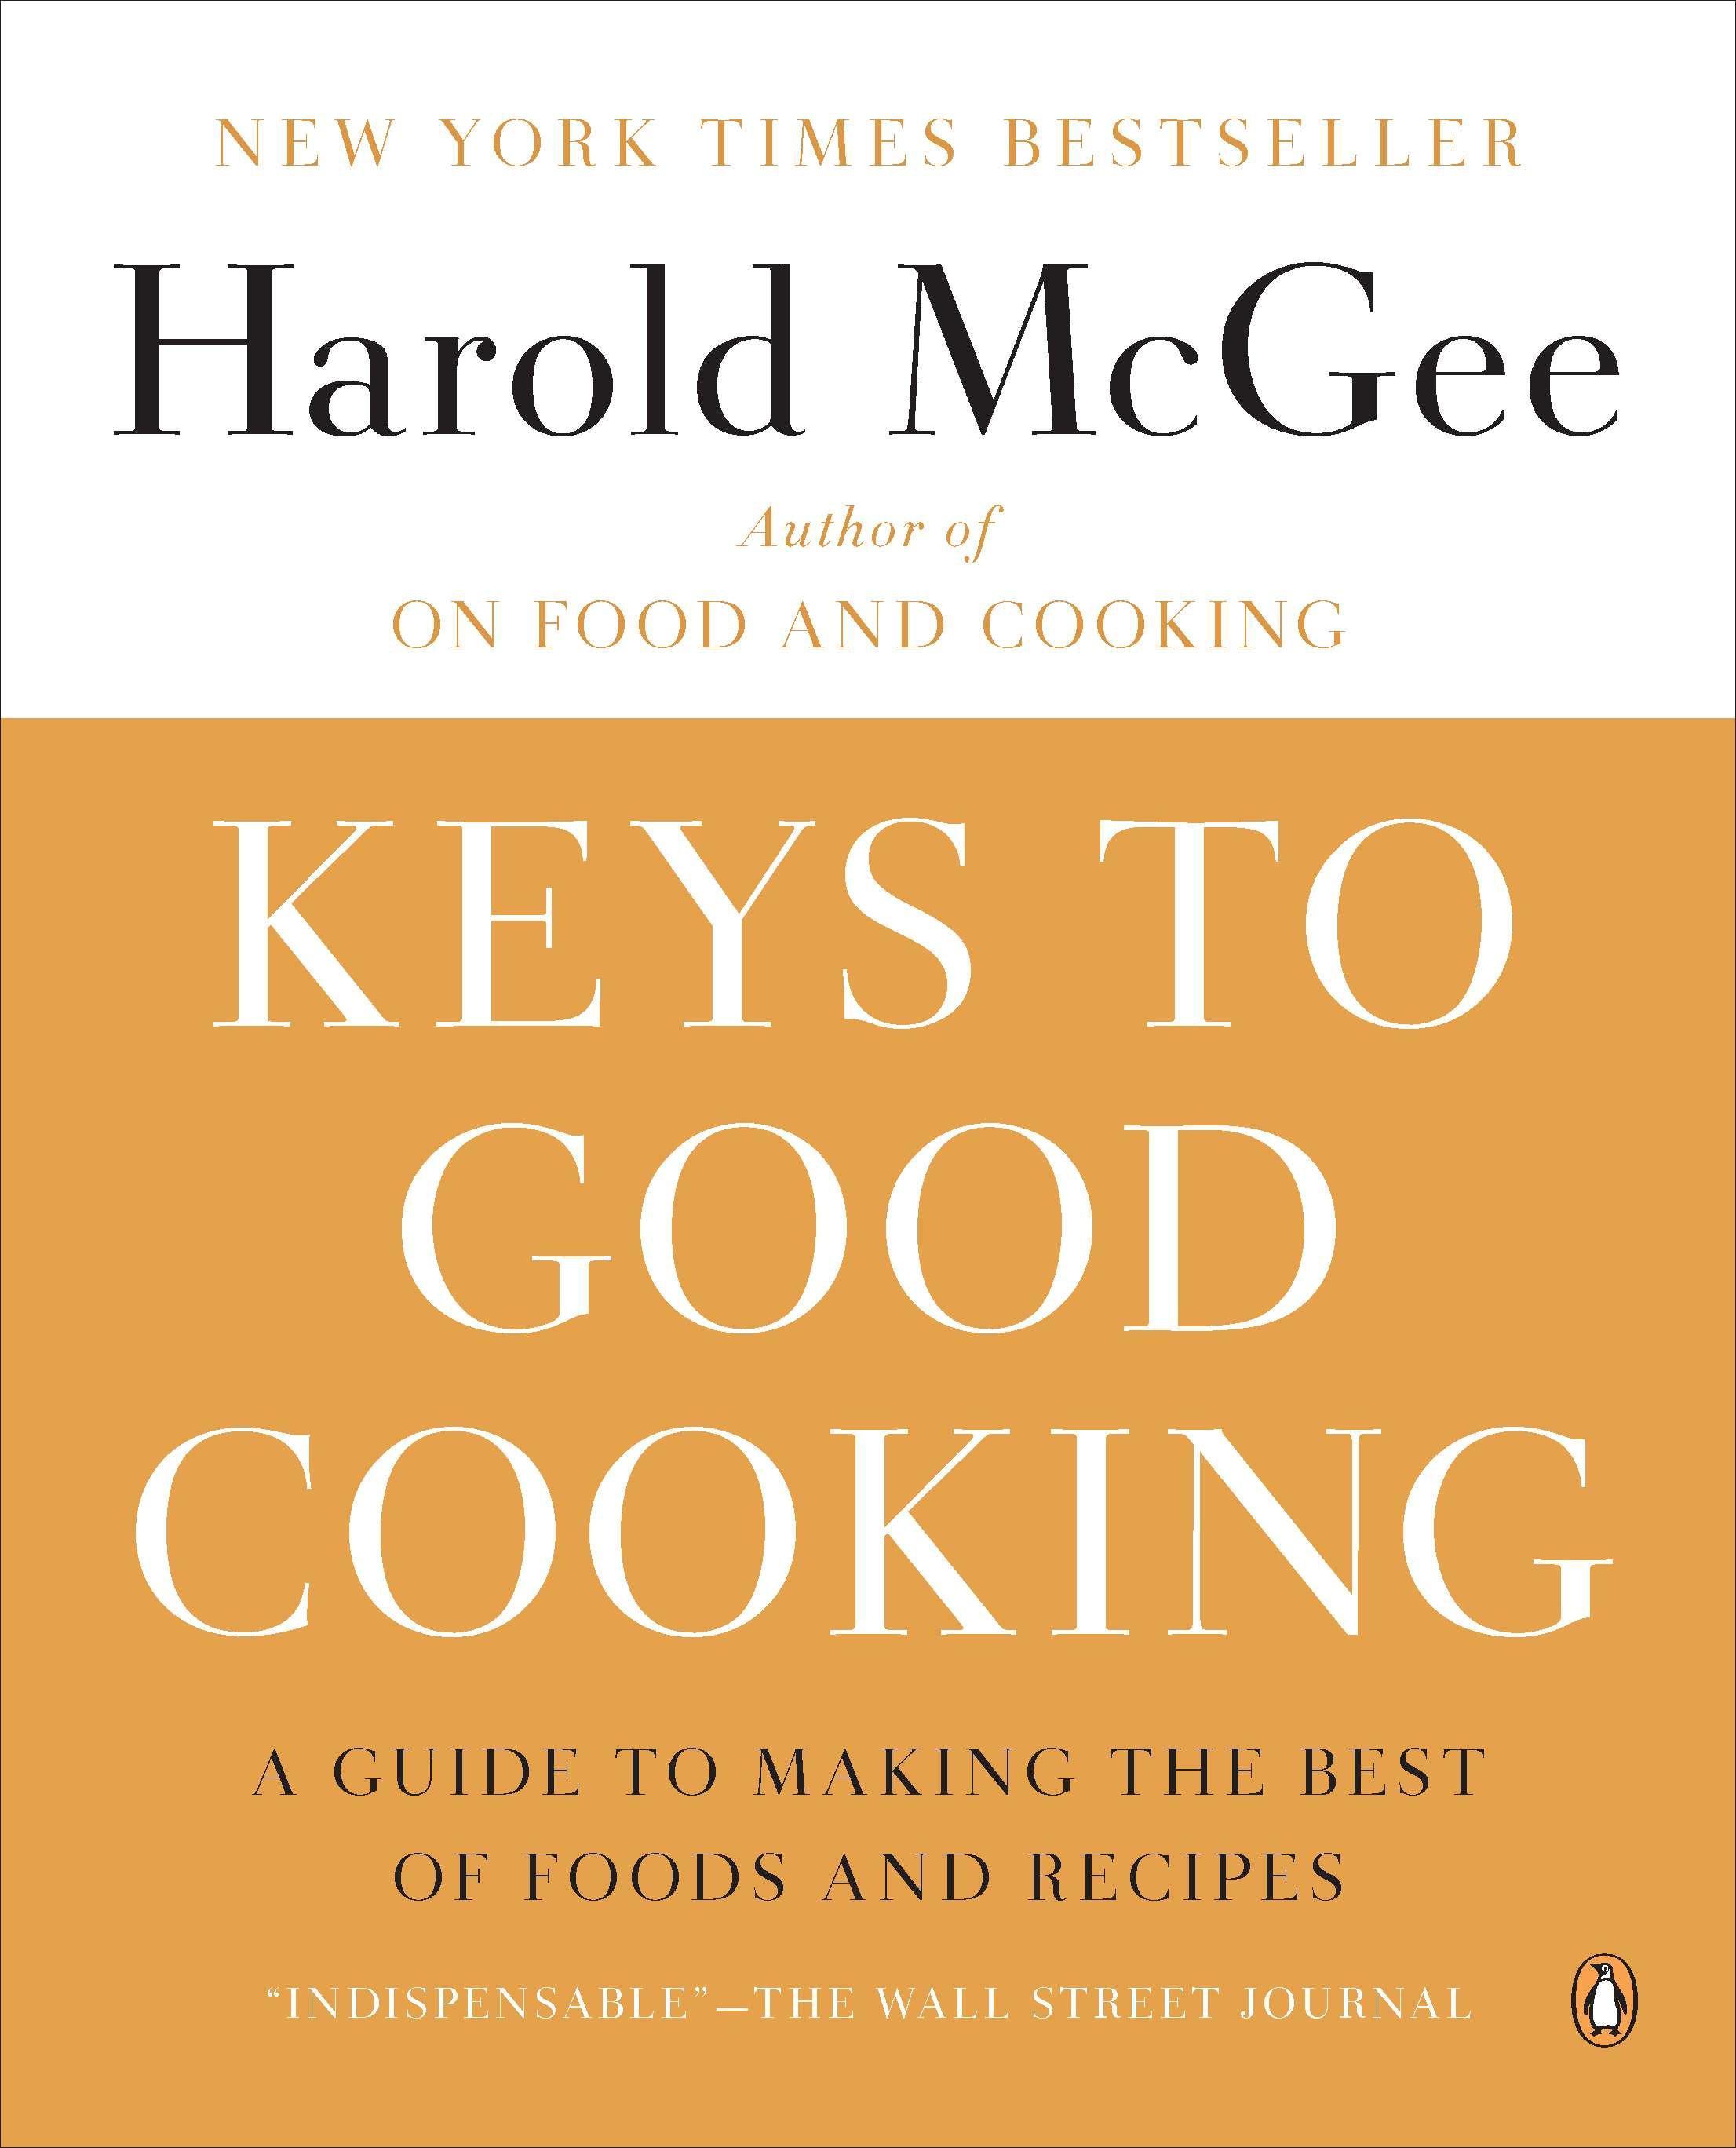 Keys to Good Cooking: A Guide to Making the Best of Foods and Recipes / Harold Mcgee / Taschenbuch / Englisch / 2012 / PENGUIN GROUP / EAN 9780143122319 - Mcgee, Harold